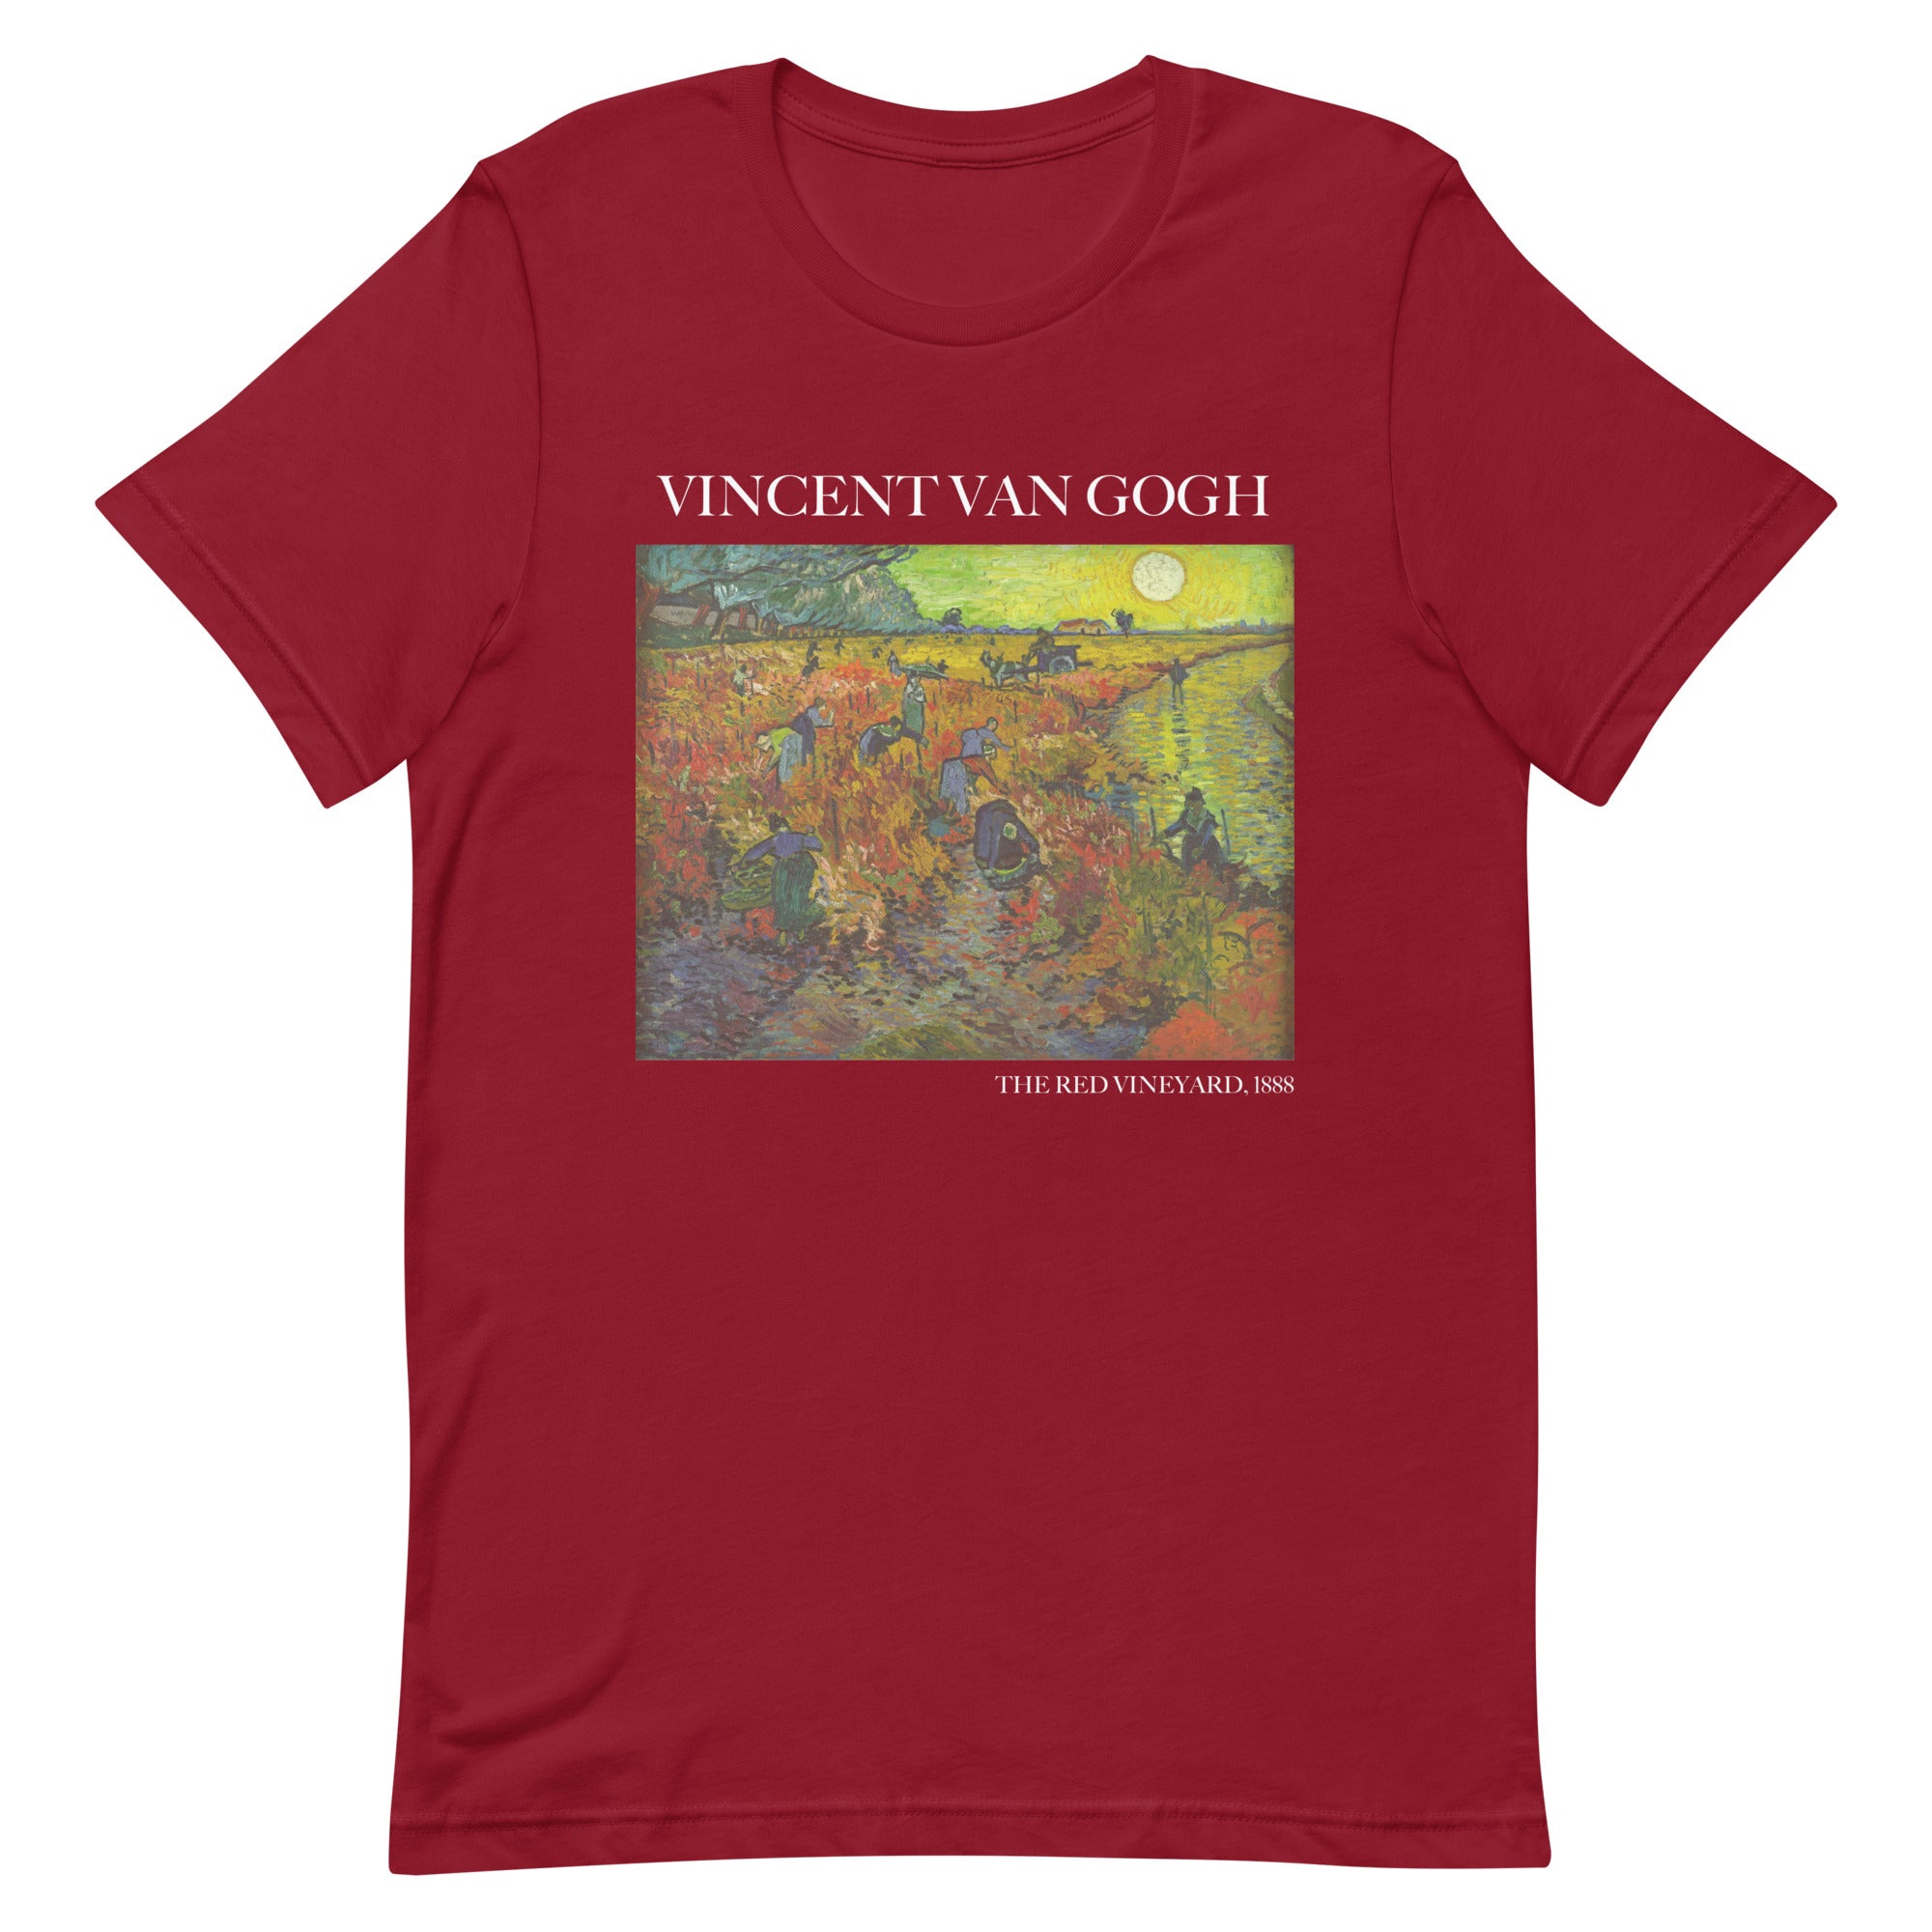 Vincent van Gogh 'The Red Vineyard' Famous Painting T-Shirt | Unisex Classic Art Tee